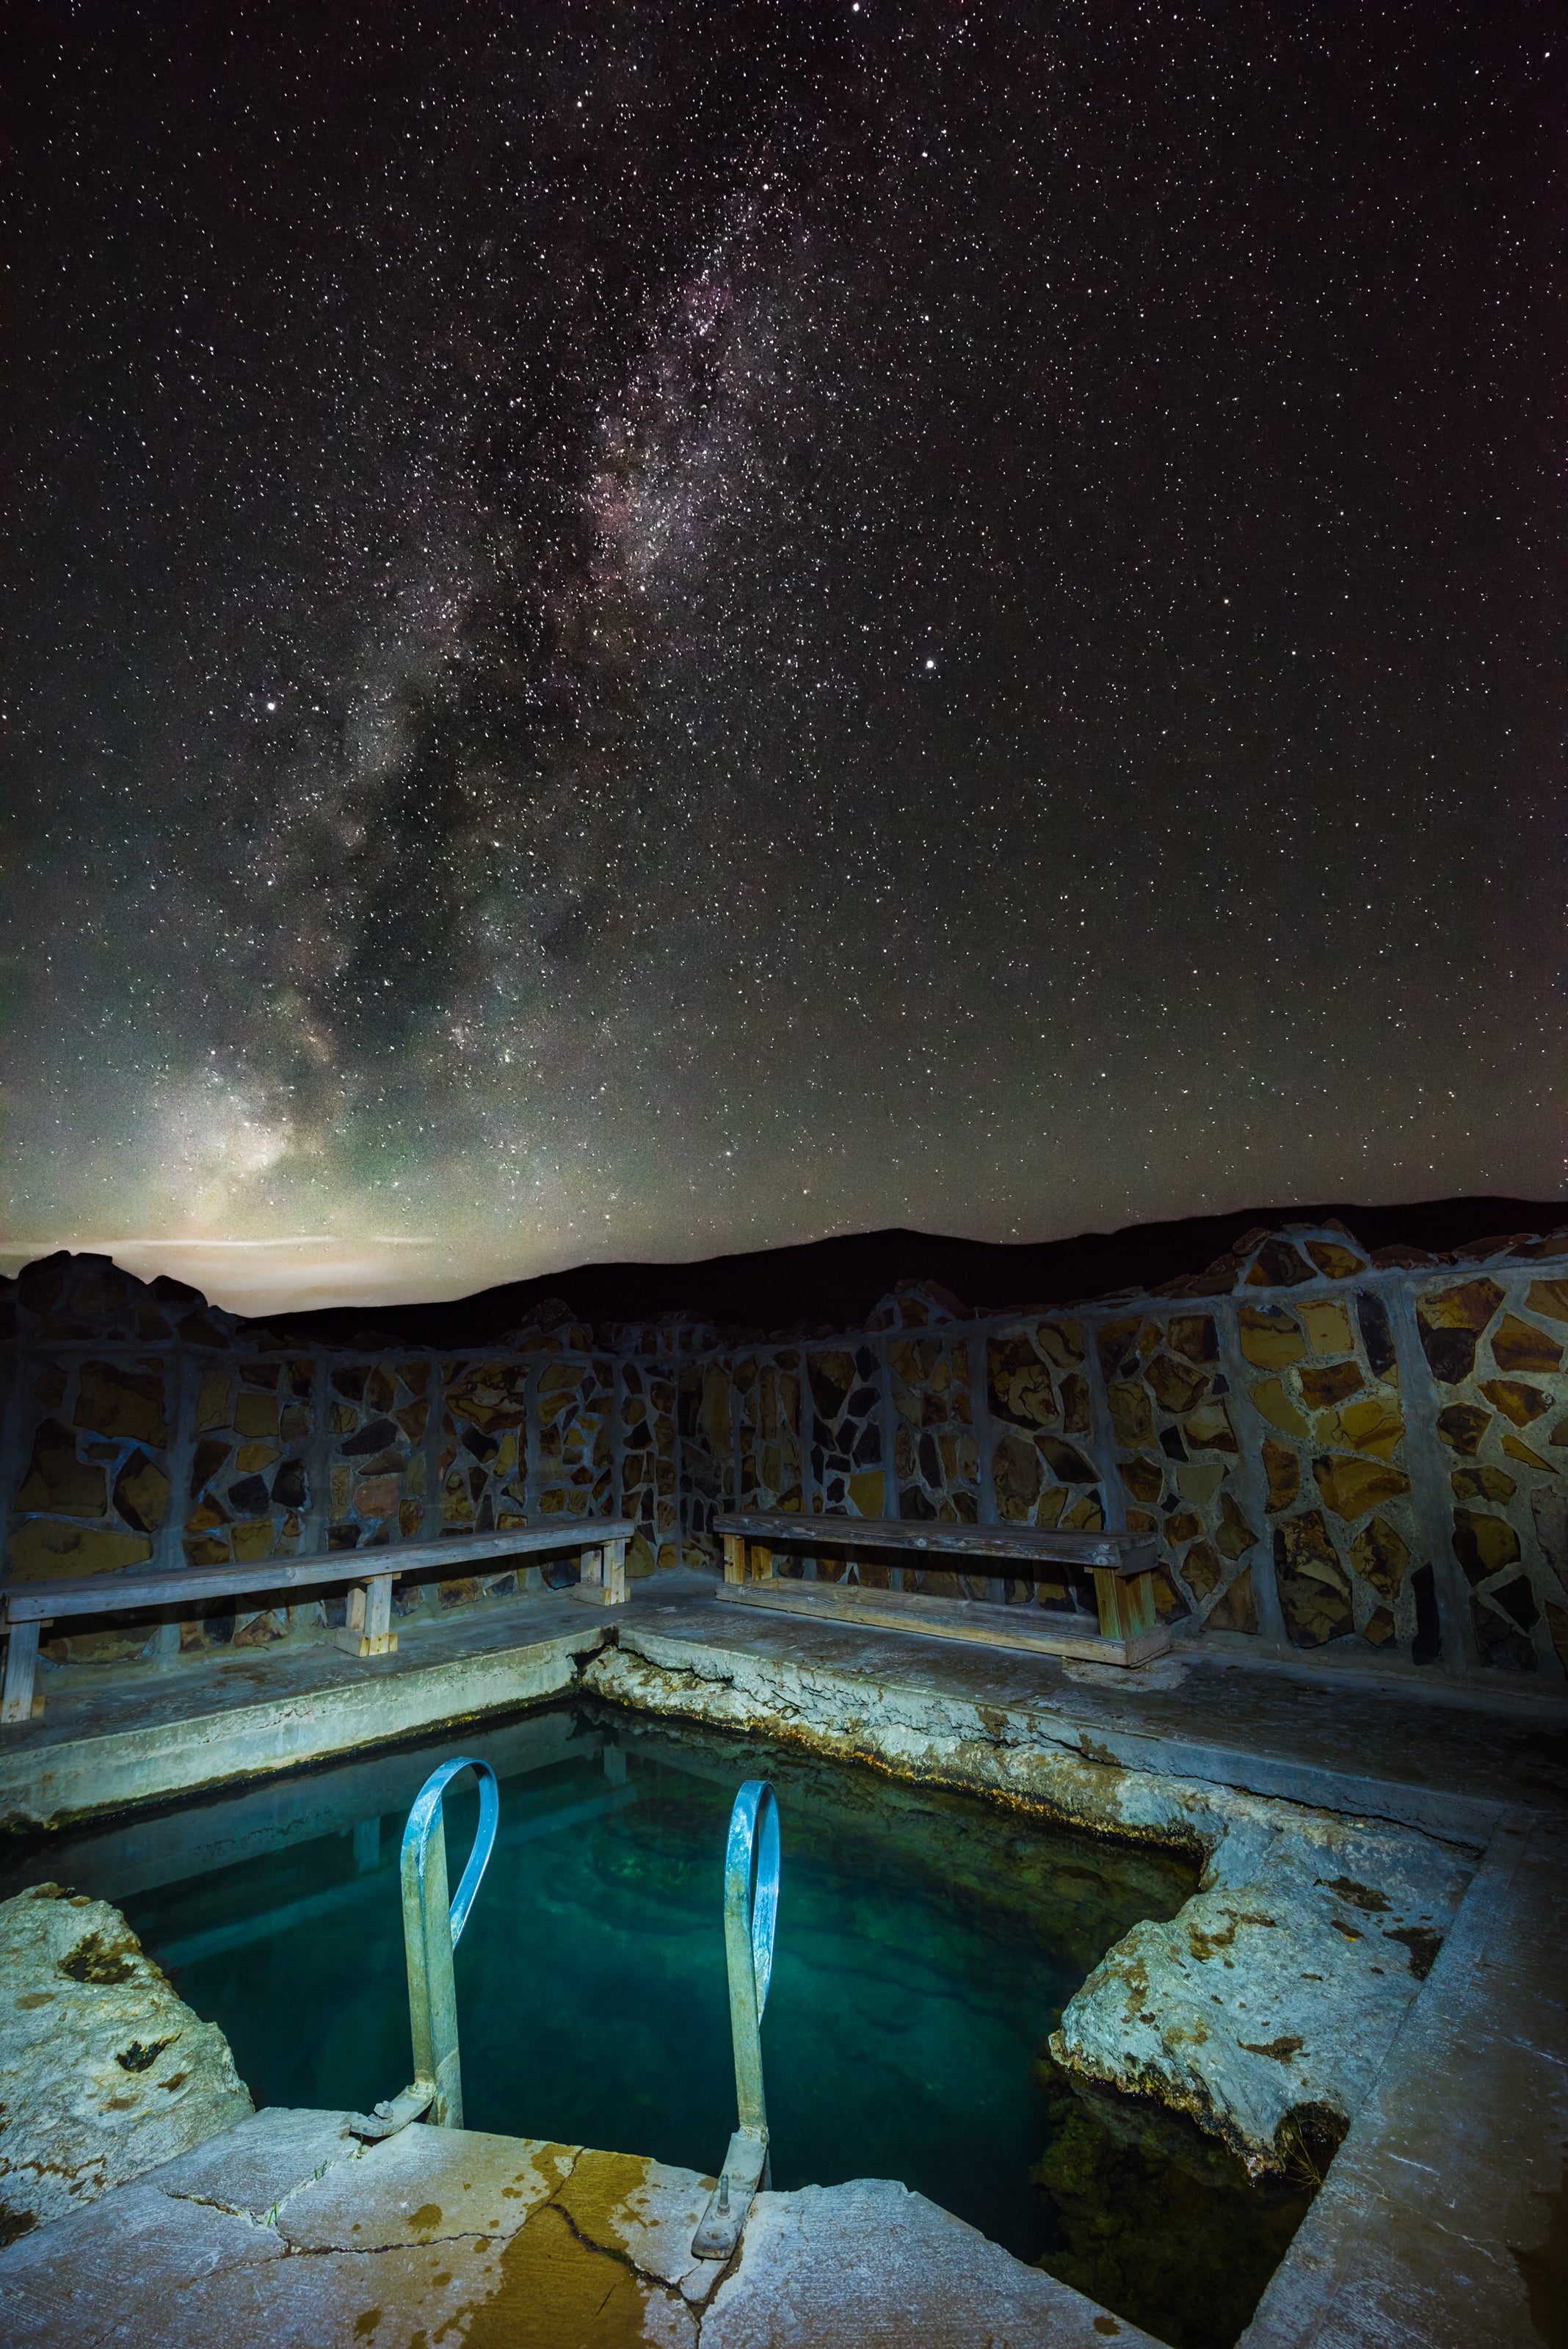 Hot springs at night under the star filled sky with a ladder and brick pool.